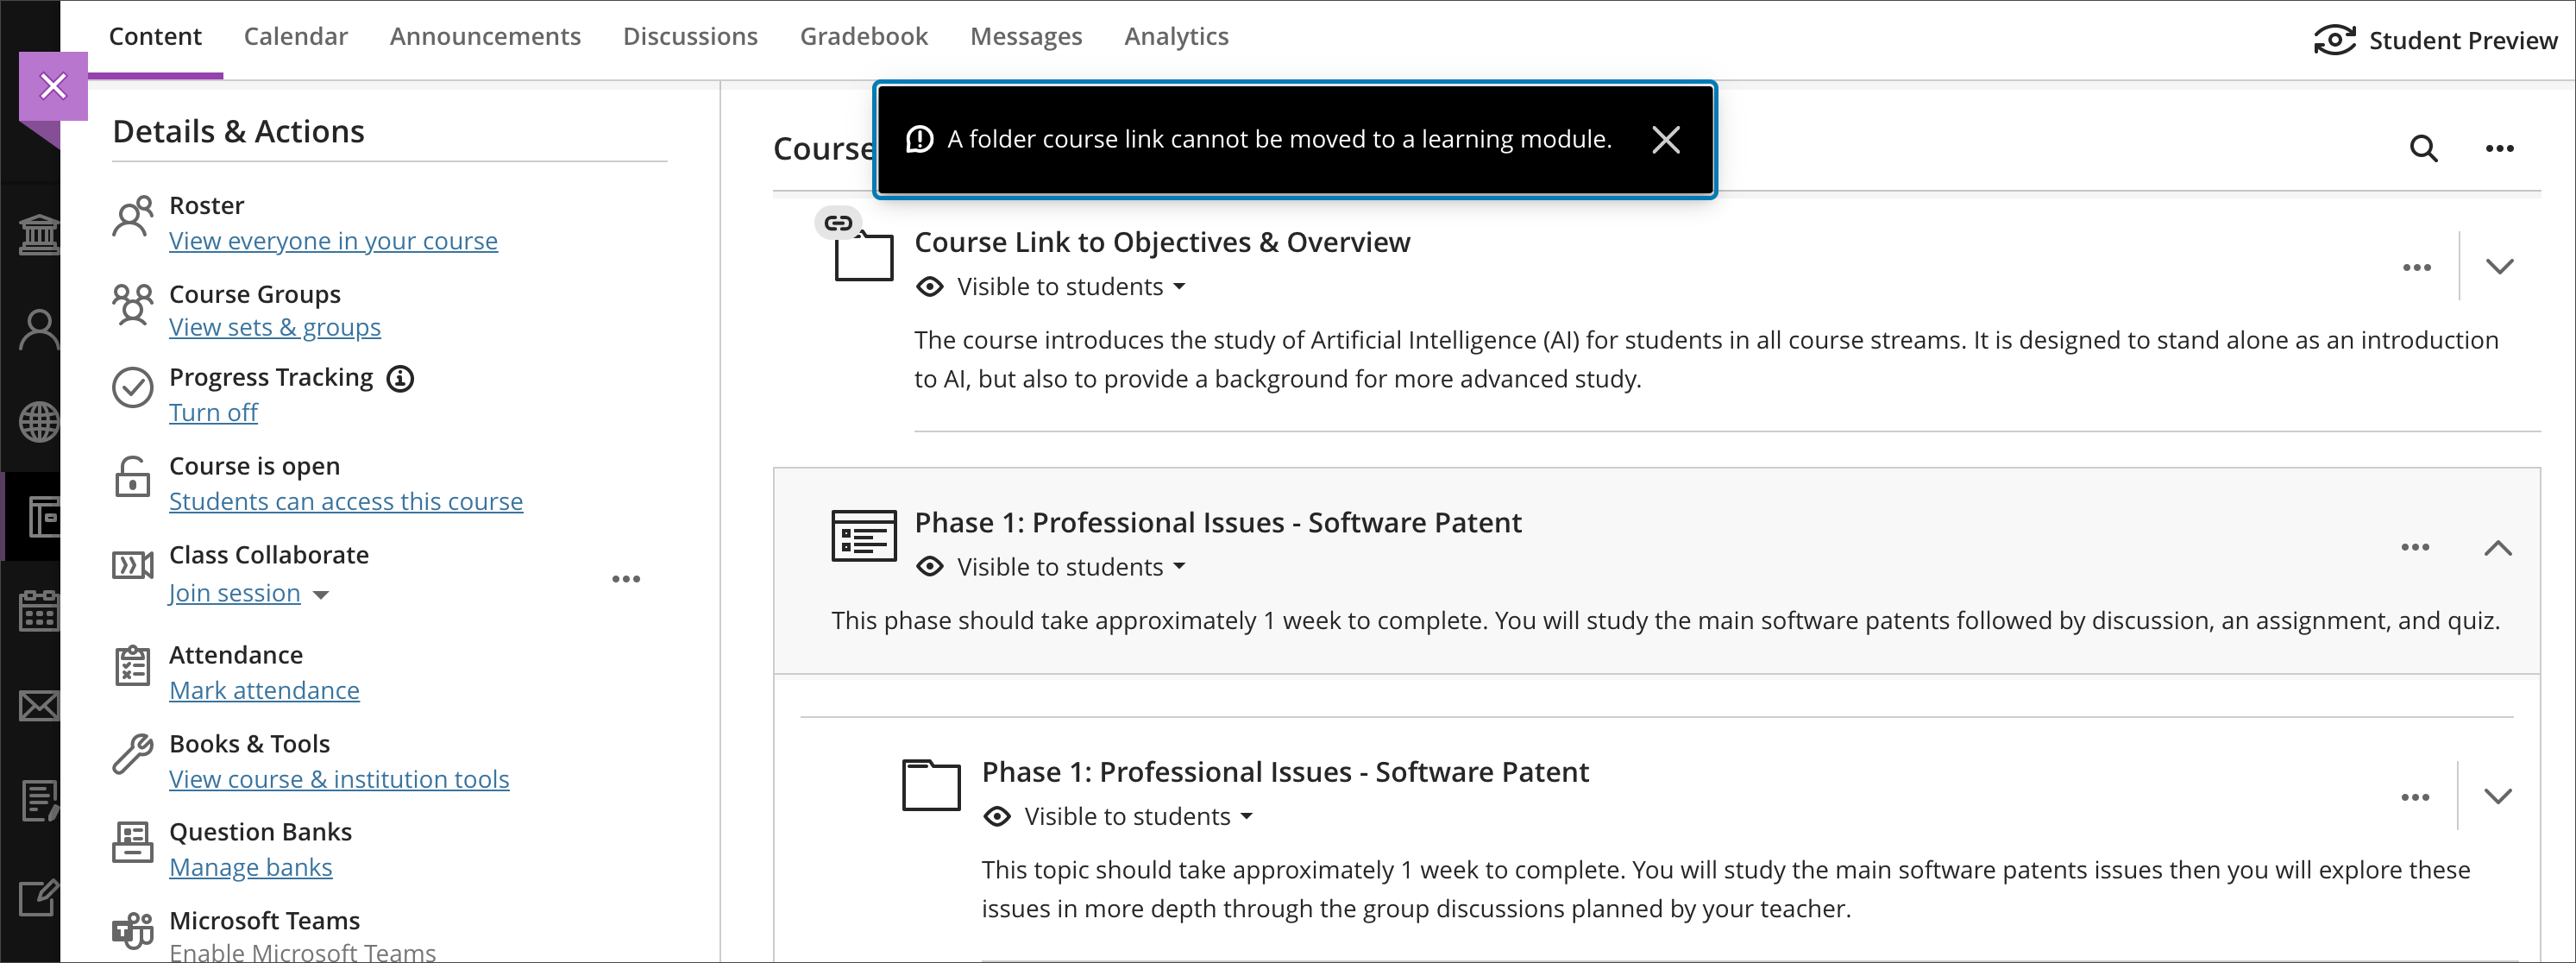 Warning message alerting an instructor that a course link to a folder cannot be moved into another learning module